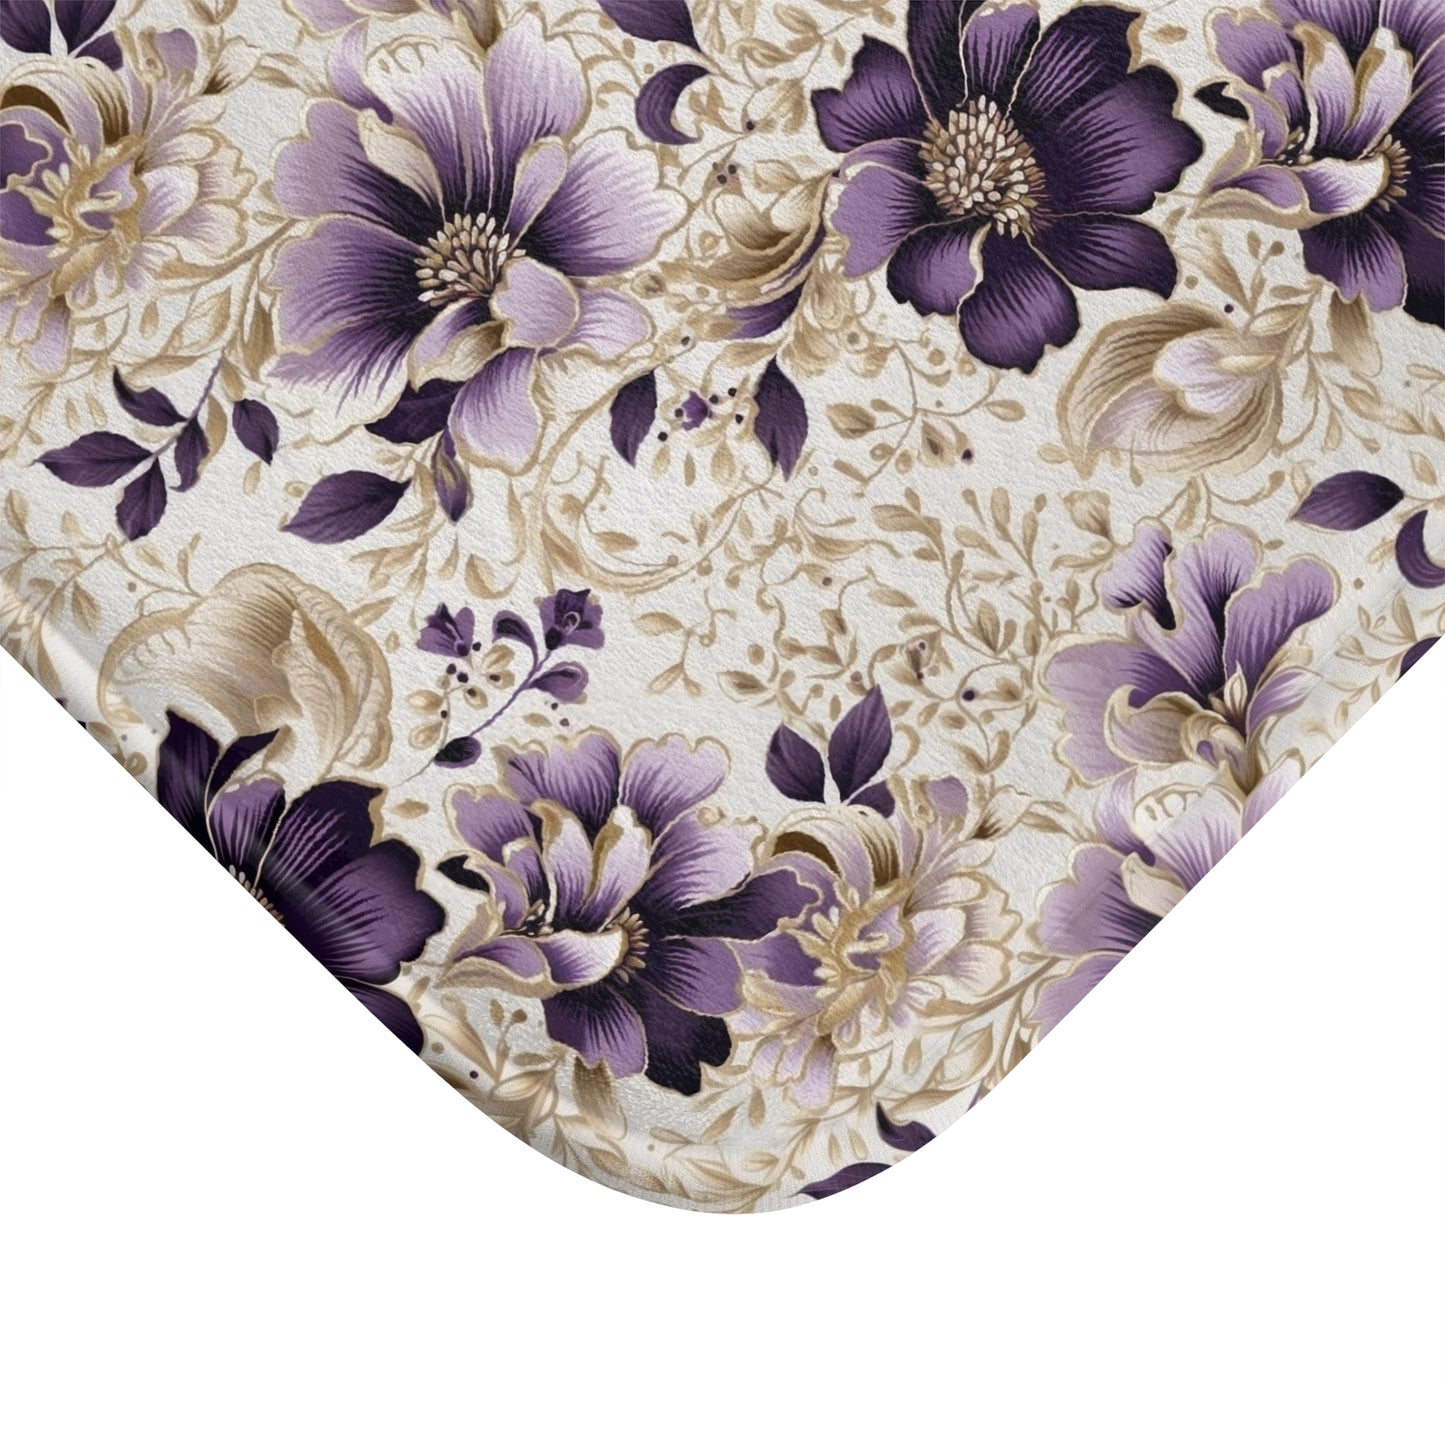 Purple Majesty: Watercolor Floral Design with Gold Foliage Accents - Bathroom Non-Slip Mat 2 Sizes